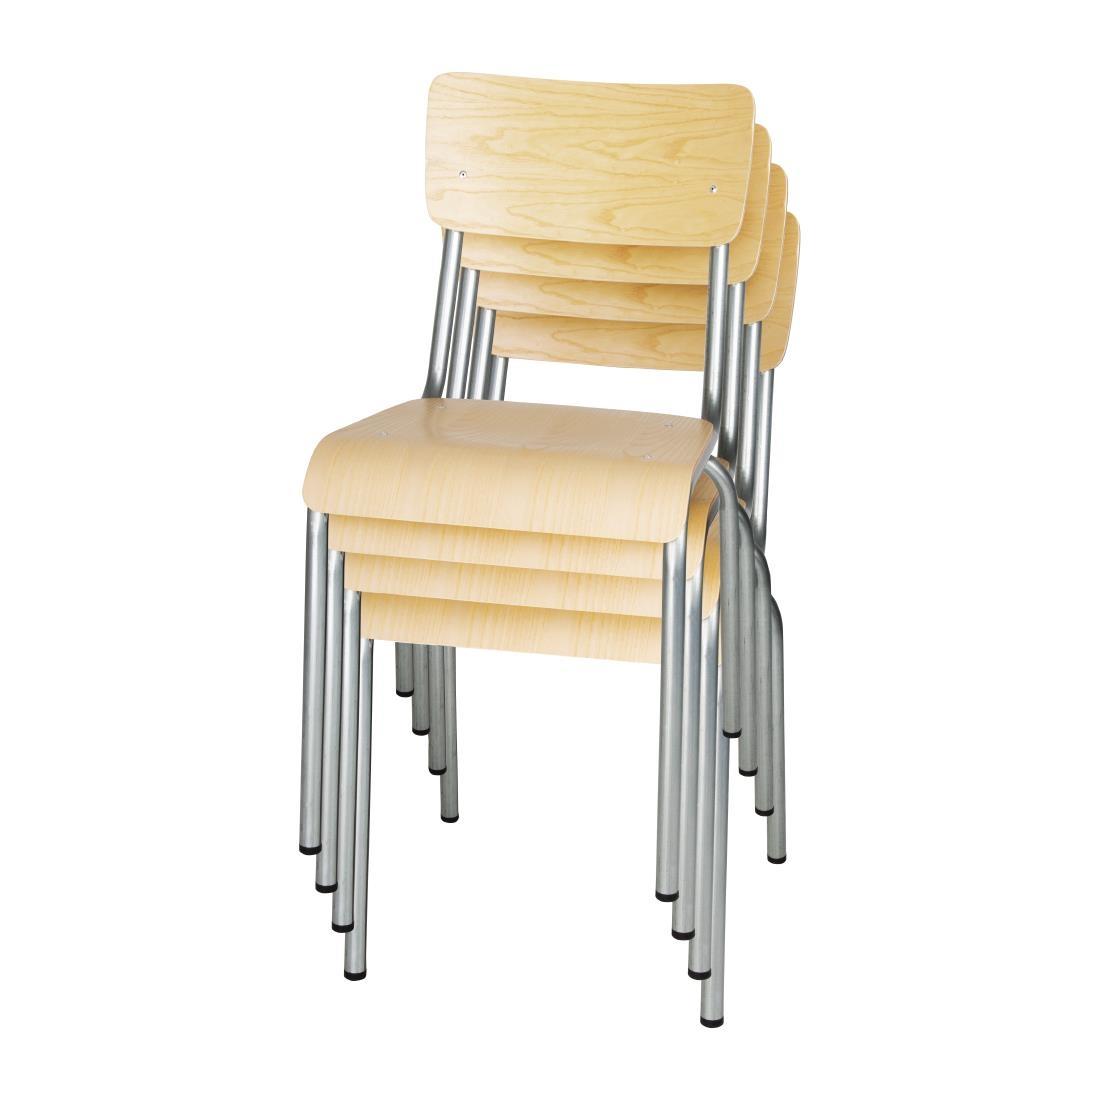 Bolero Cantina Side Chairs with Wooden Seat Pad and Backrest Galvanised (Pack of 4) - FB946  - 5